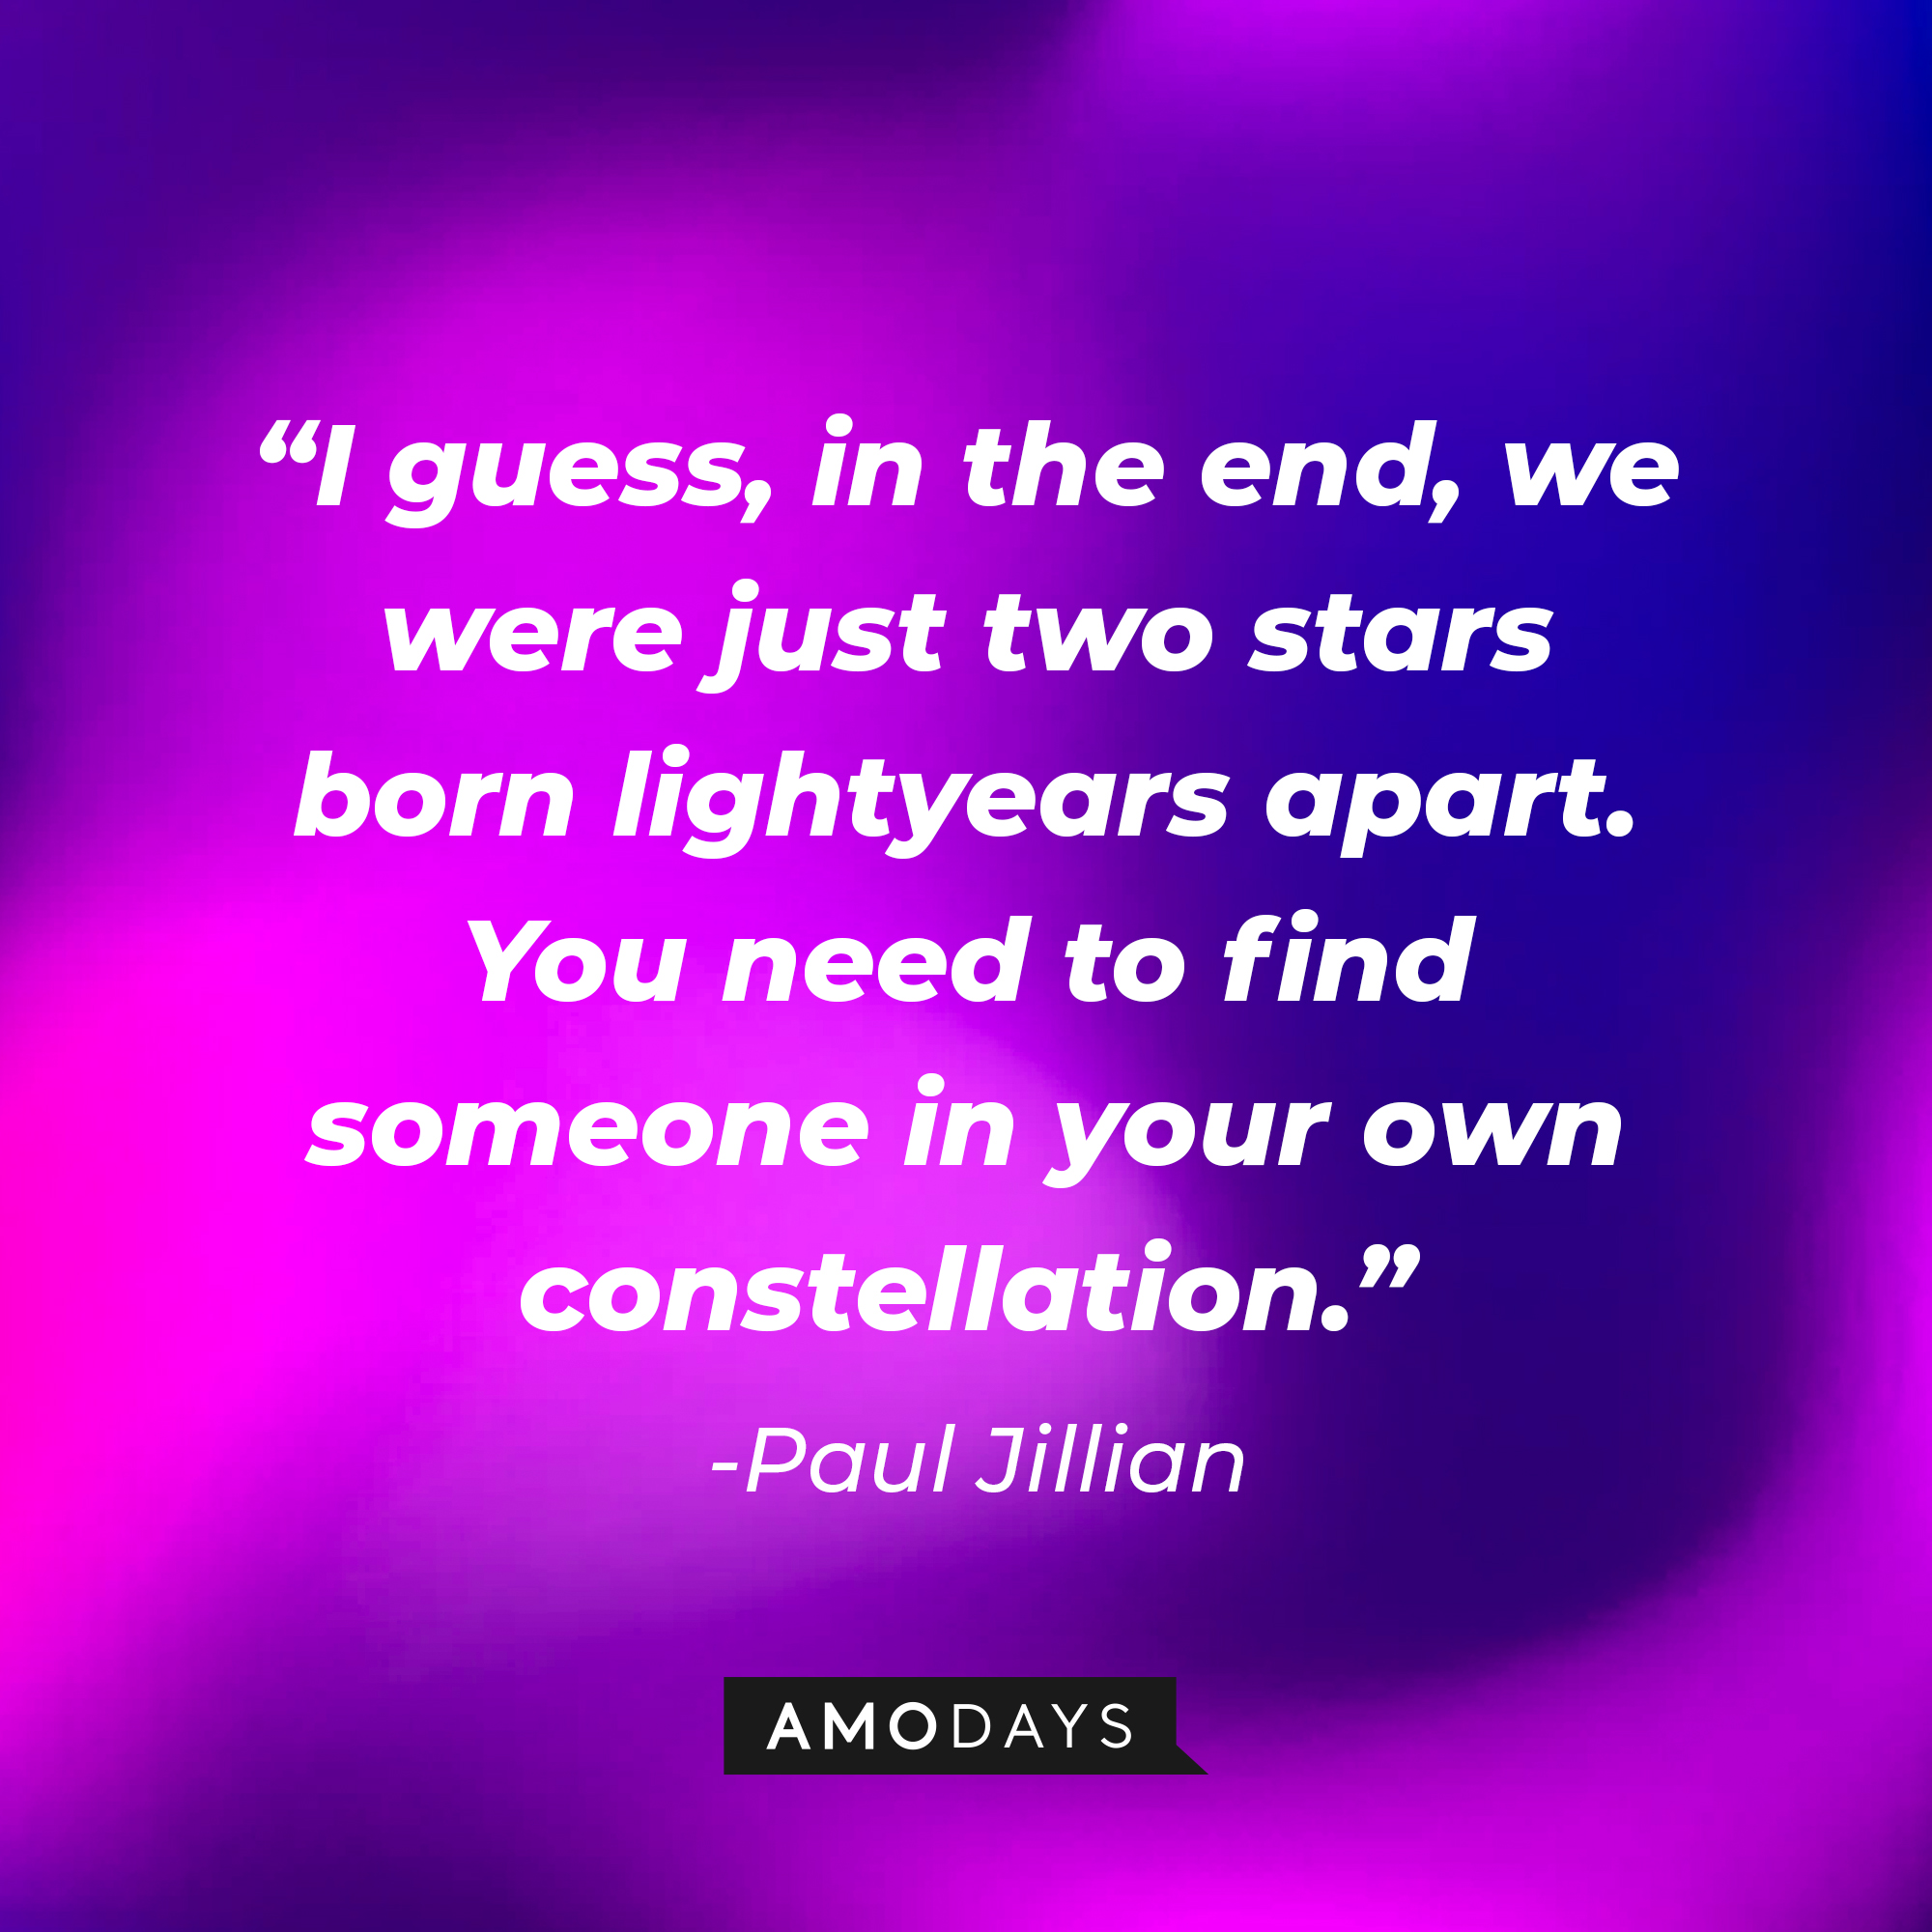 Paul Jillian’s quote: "I guess, in the end, we were just two stars born lightyears apart. You need to find someone in your own constellation." | Source: AmoDays